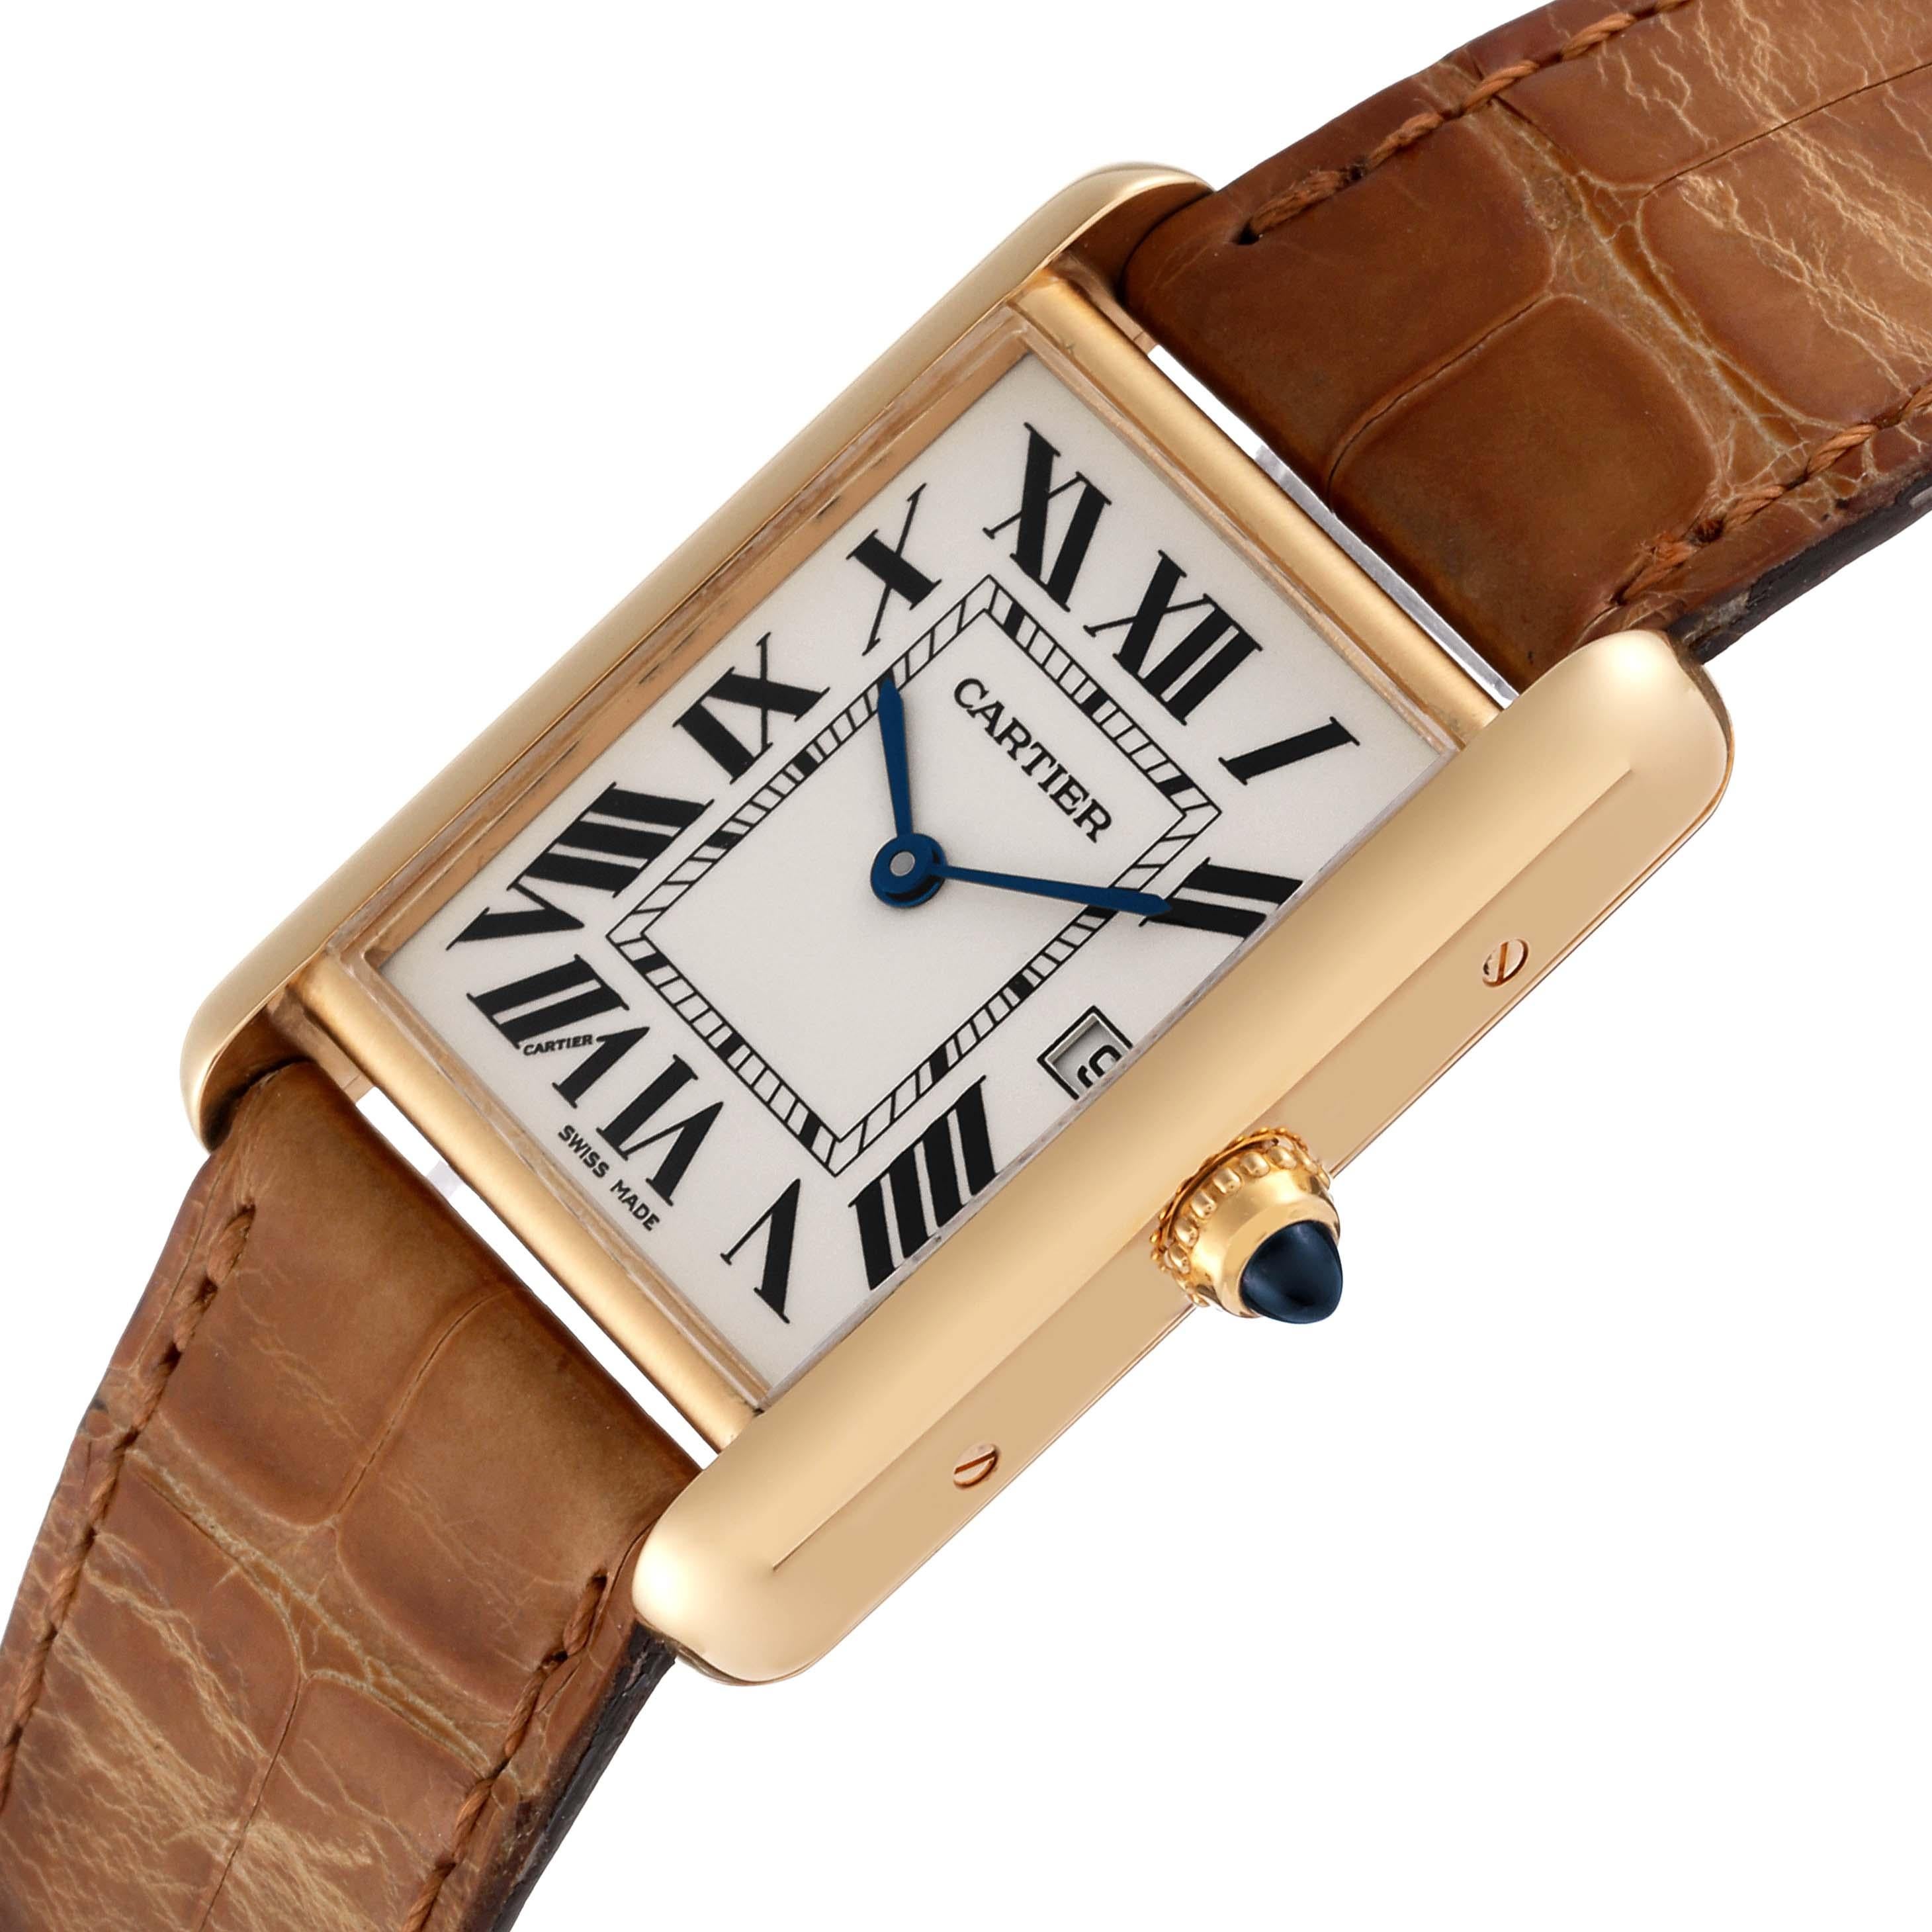 Cartier Tank Louis Yellow Gold Brown Leather Strap Mens Watch W1529756 Card. Quartz movement. 18k yellow gold case 25.0 x 33.0 mm. Circular grained crown set with a blue sapphire cabochon. . Mineral crystal. Silvered opaline dial with black Roman